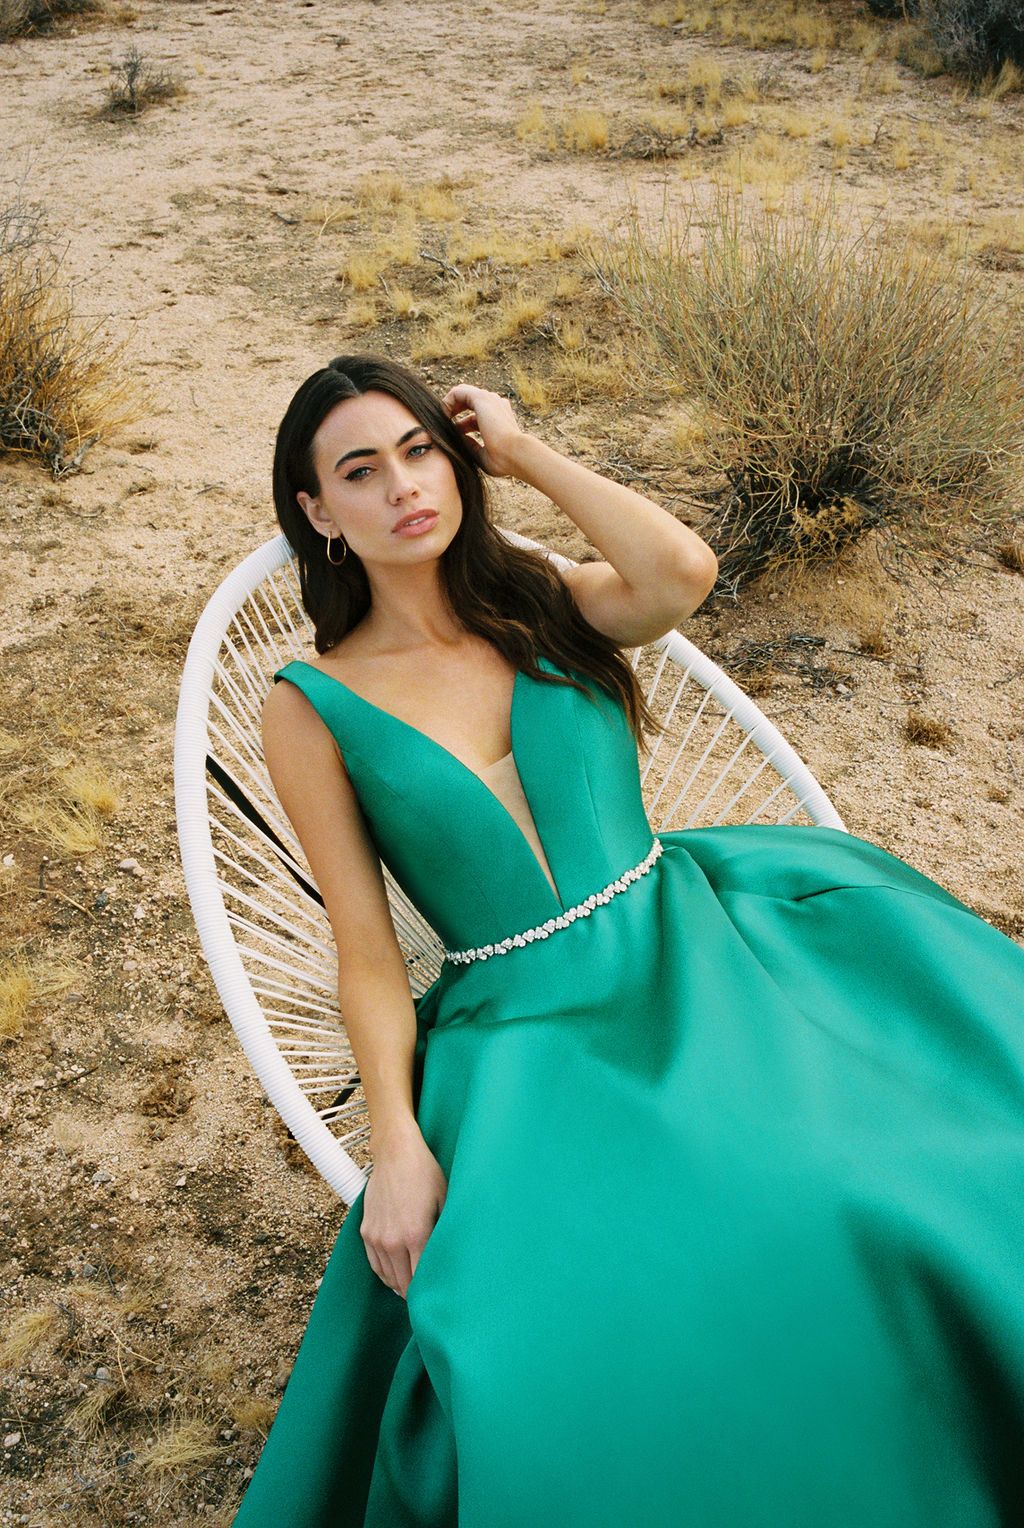 Madison James 20-357 dress images in these colors: Emerald, Fuchsia, Silver, Royal, Yellow.